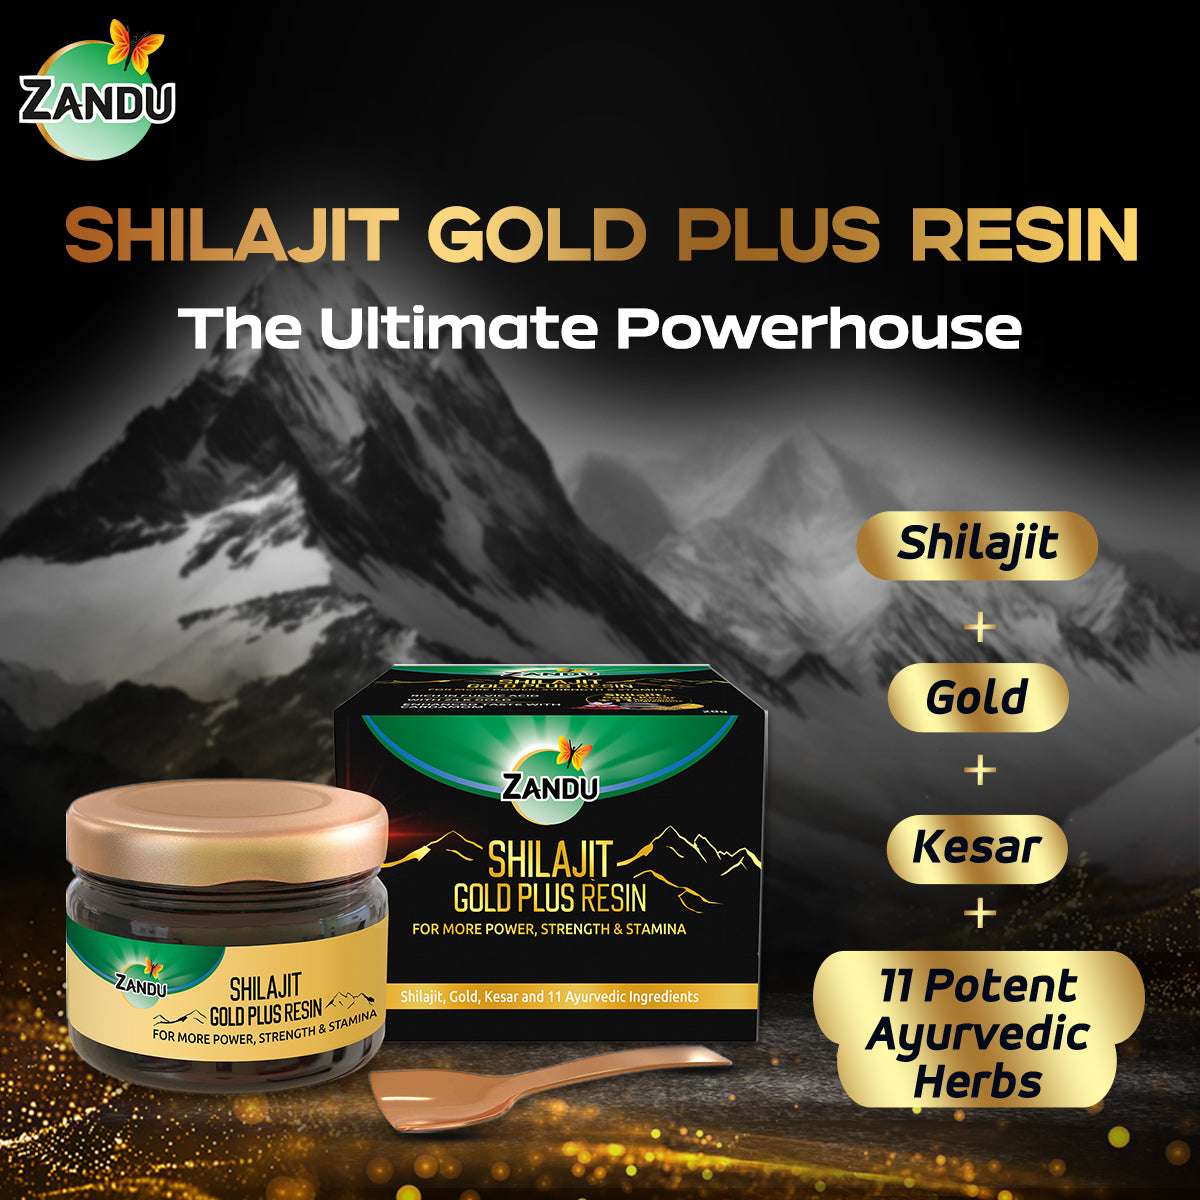 Pure Shilajit Gold Plus Resin for All-Day Power, Energy & Strength